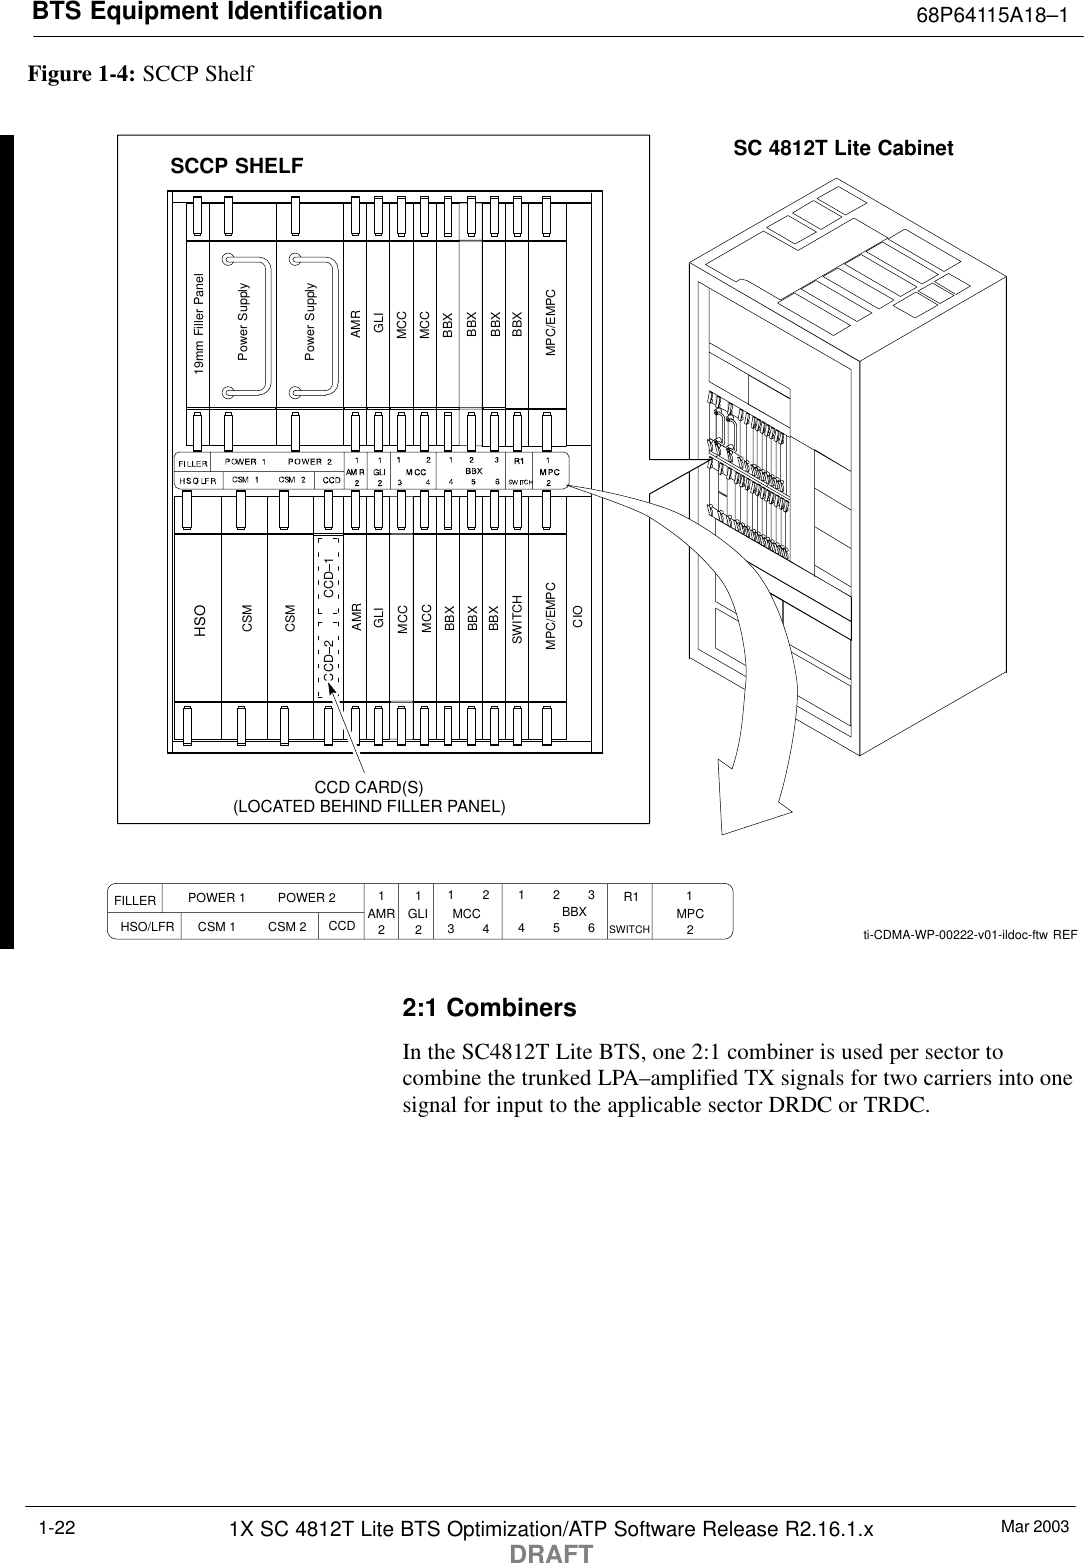 BTS Equipment Identification 68P64115A18–1Mar 20031X SC 4812T Lite BTS Optimization/ATP Software Release R2.16.1.xDRAFT1-22Figure 1-4: SCCP Shelfti-CDMA-WP-00222-v01-ildoc-ftw REFSC 4812T Lite CabinetMPC/EMPCCSMPower SupplyPower SupplyMPC/EMPCCSMCCD–1CCD–2AMRHSOAMRGLI GLIMCCMCCMCCMCCBBXBBXBBXBBXBBXBBXSWITCH19mm Filler PanelBBXCIOCCD CARD(S)(LOCATED BEHIND FILLER PANEL)SCCP SHELFFILLER POWER 1         POWER 2HSO/LFR CSM 1         CSM 2 CCD AMR GLI1        23        4MCC1        2        34        5        6BBX R1SWITCH121212MPC2:1 CombinersIn the SC4812T Lite BTS, one 2:1 combiner is used per sector tocombine the trunked LPA–amplified TX signals for two carriers into onesignal for input to the applicable sector DRDC or TRDC.